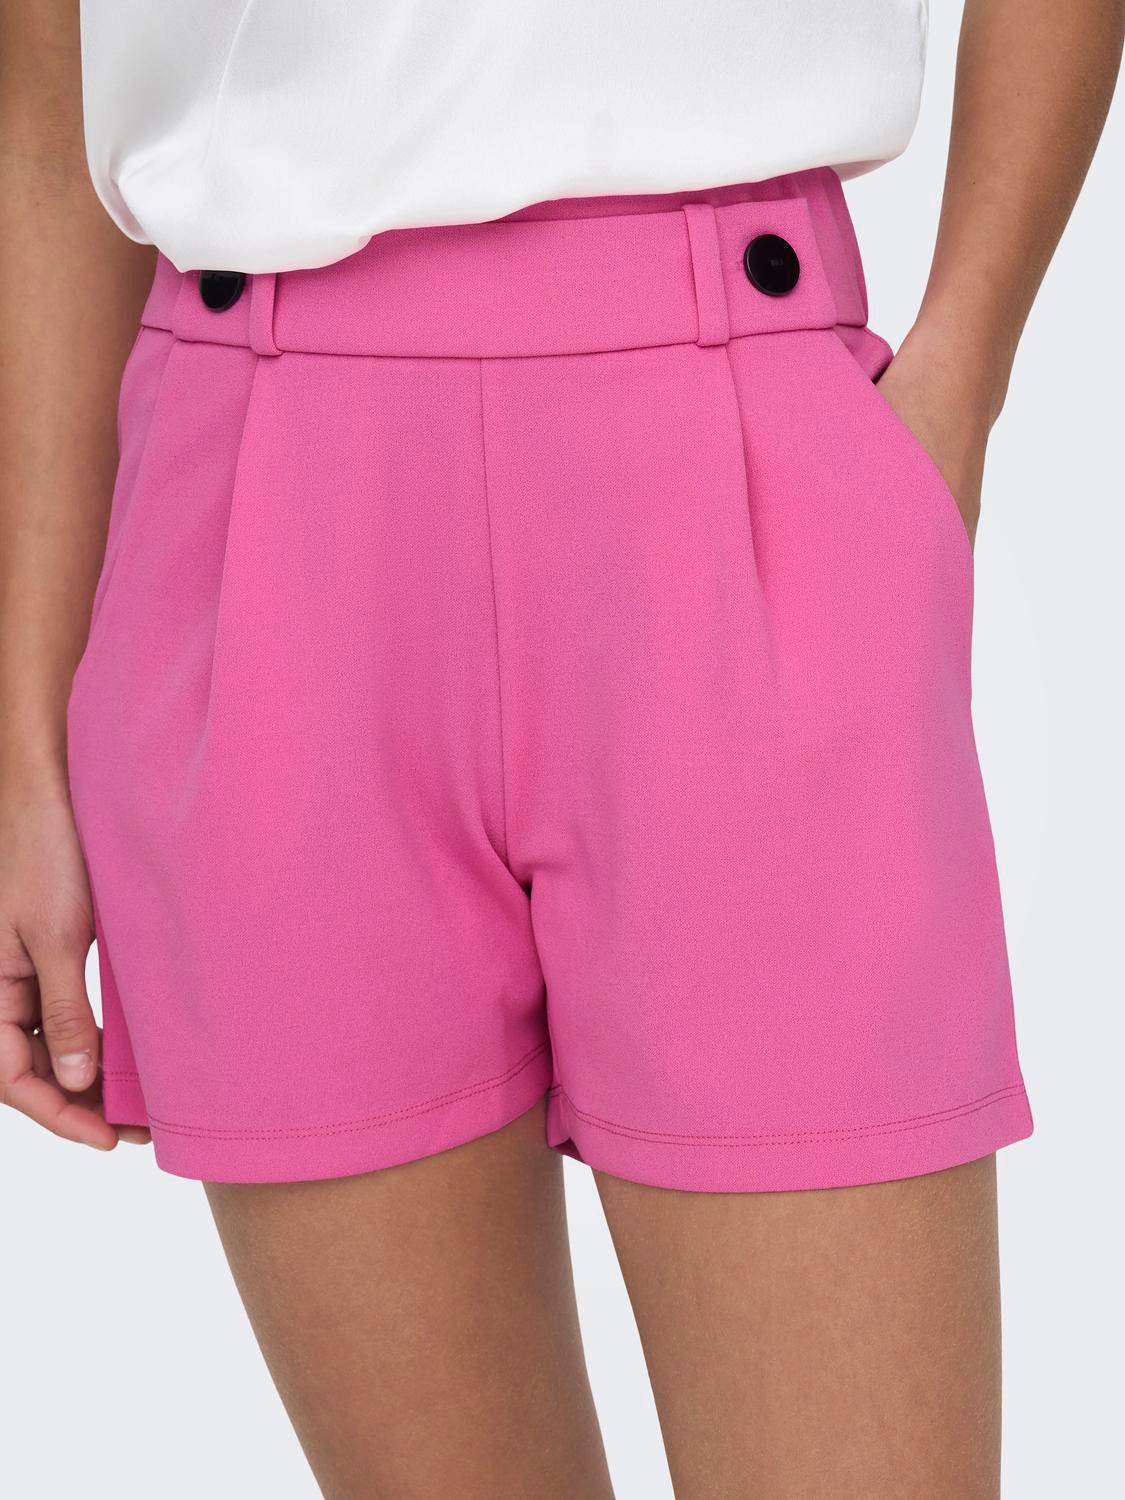 ONLY Ensfarvede Shorts -Pink Power - 15203098